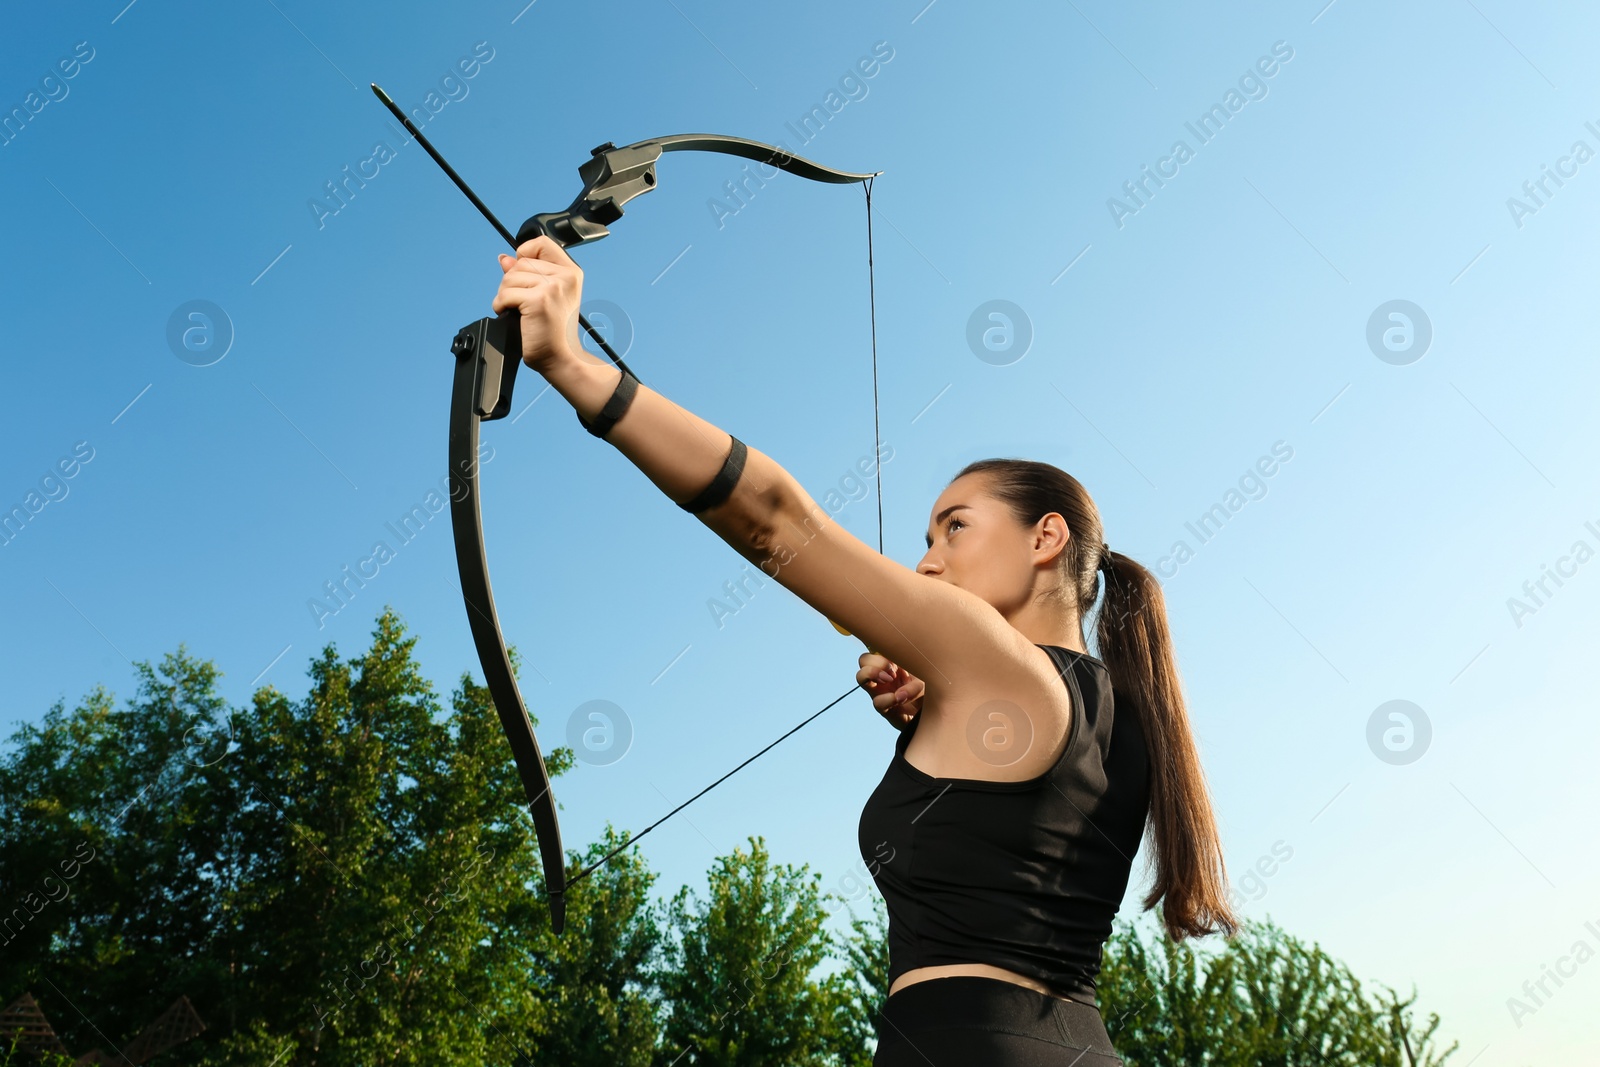 Photo of Woman with bow and arrow practicing archery outdoors, low angle view